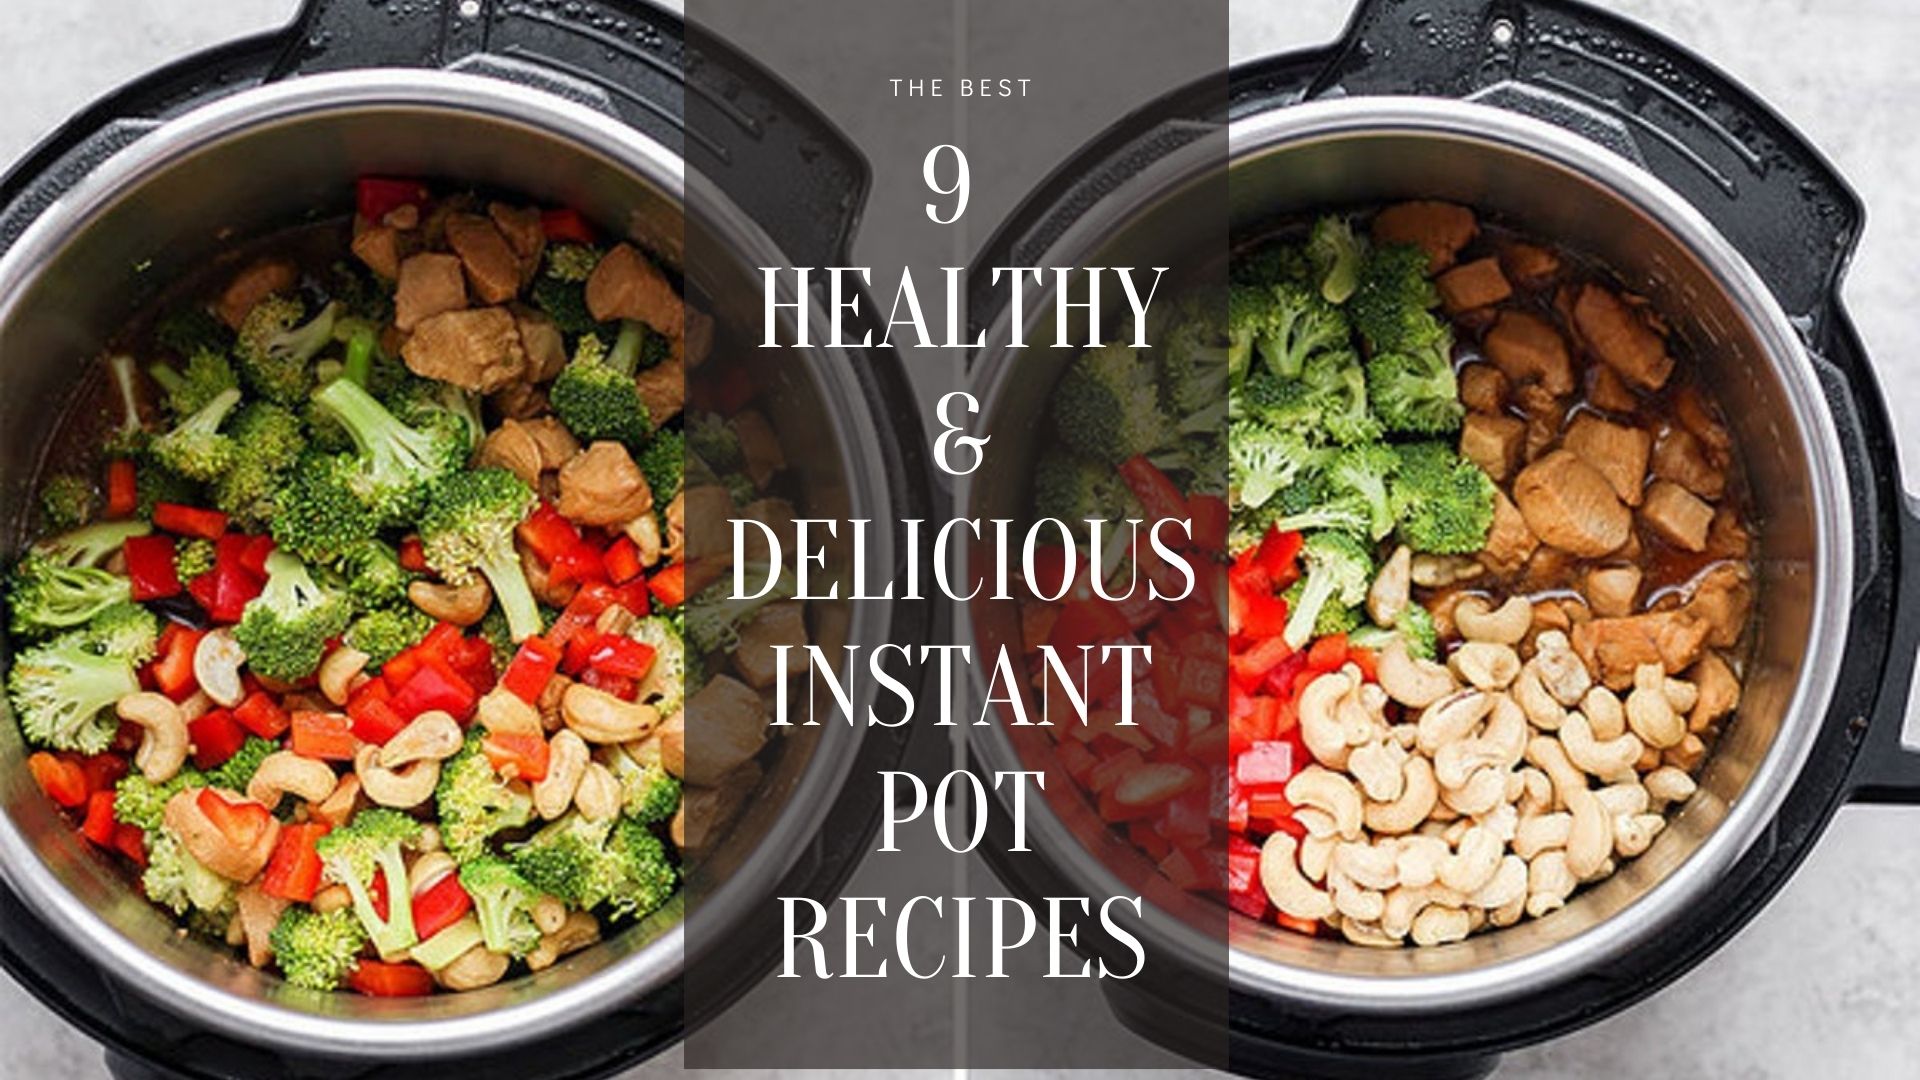 9 Healthy & Delicious Instant Pot Recipes To Try Today